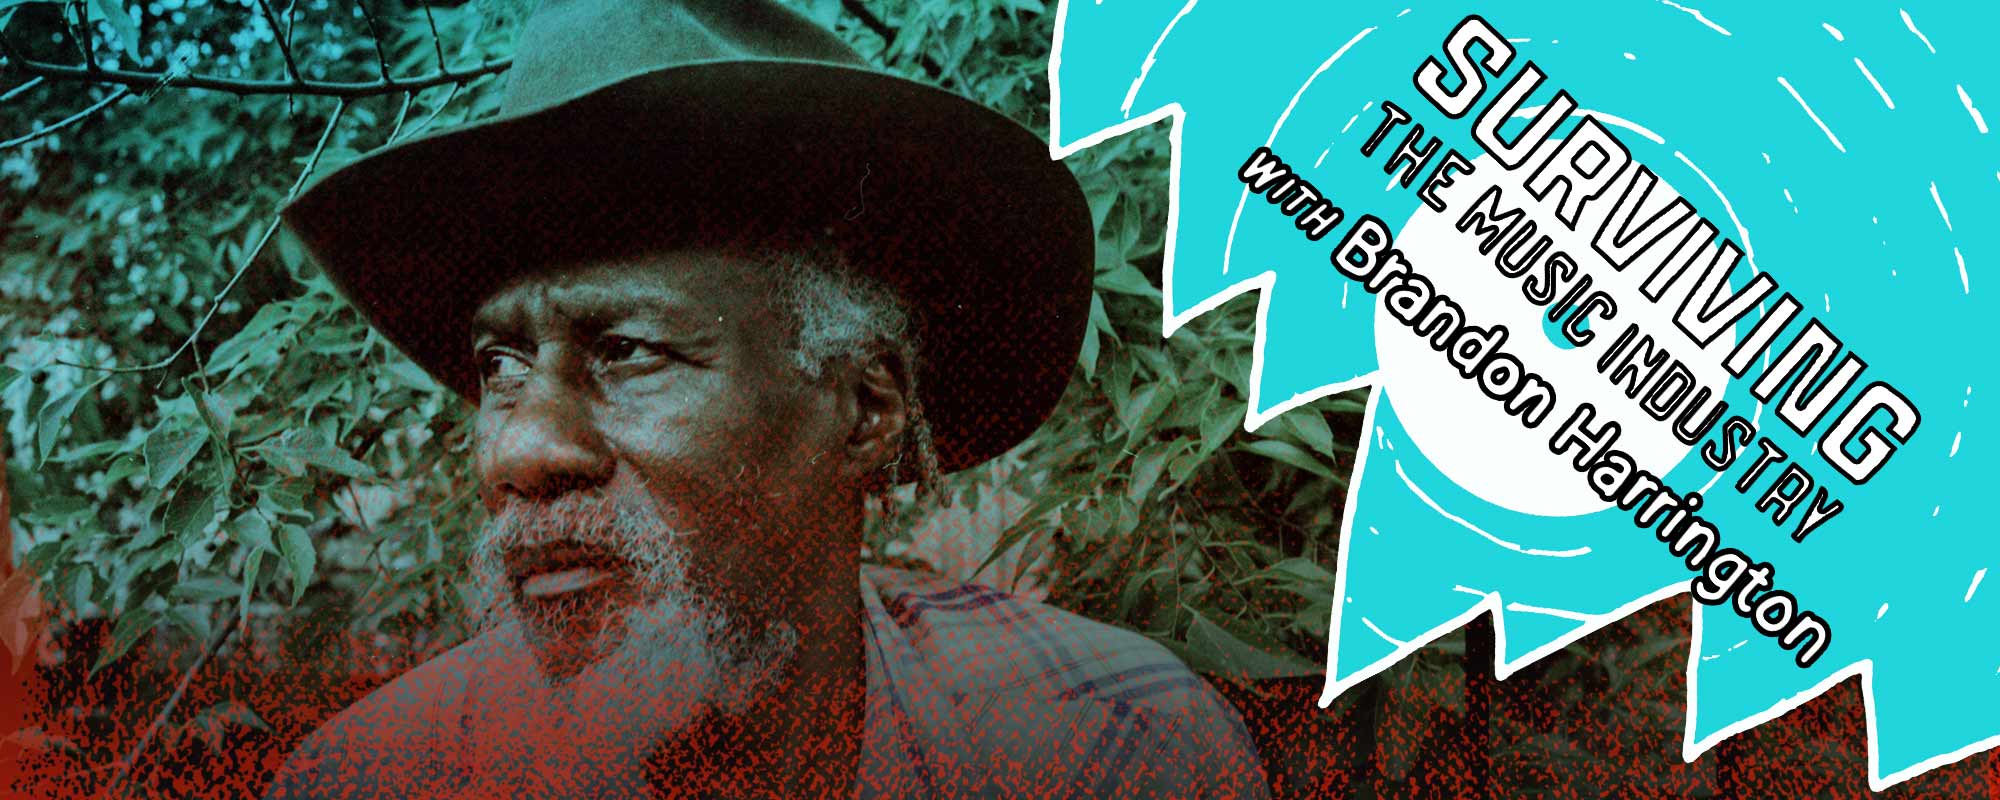 Robert Finley Confirms That The Work Ain’t Ever Done For a ‘Sharecropper’s Son’